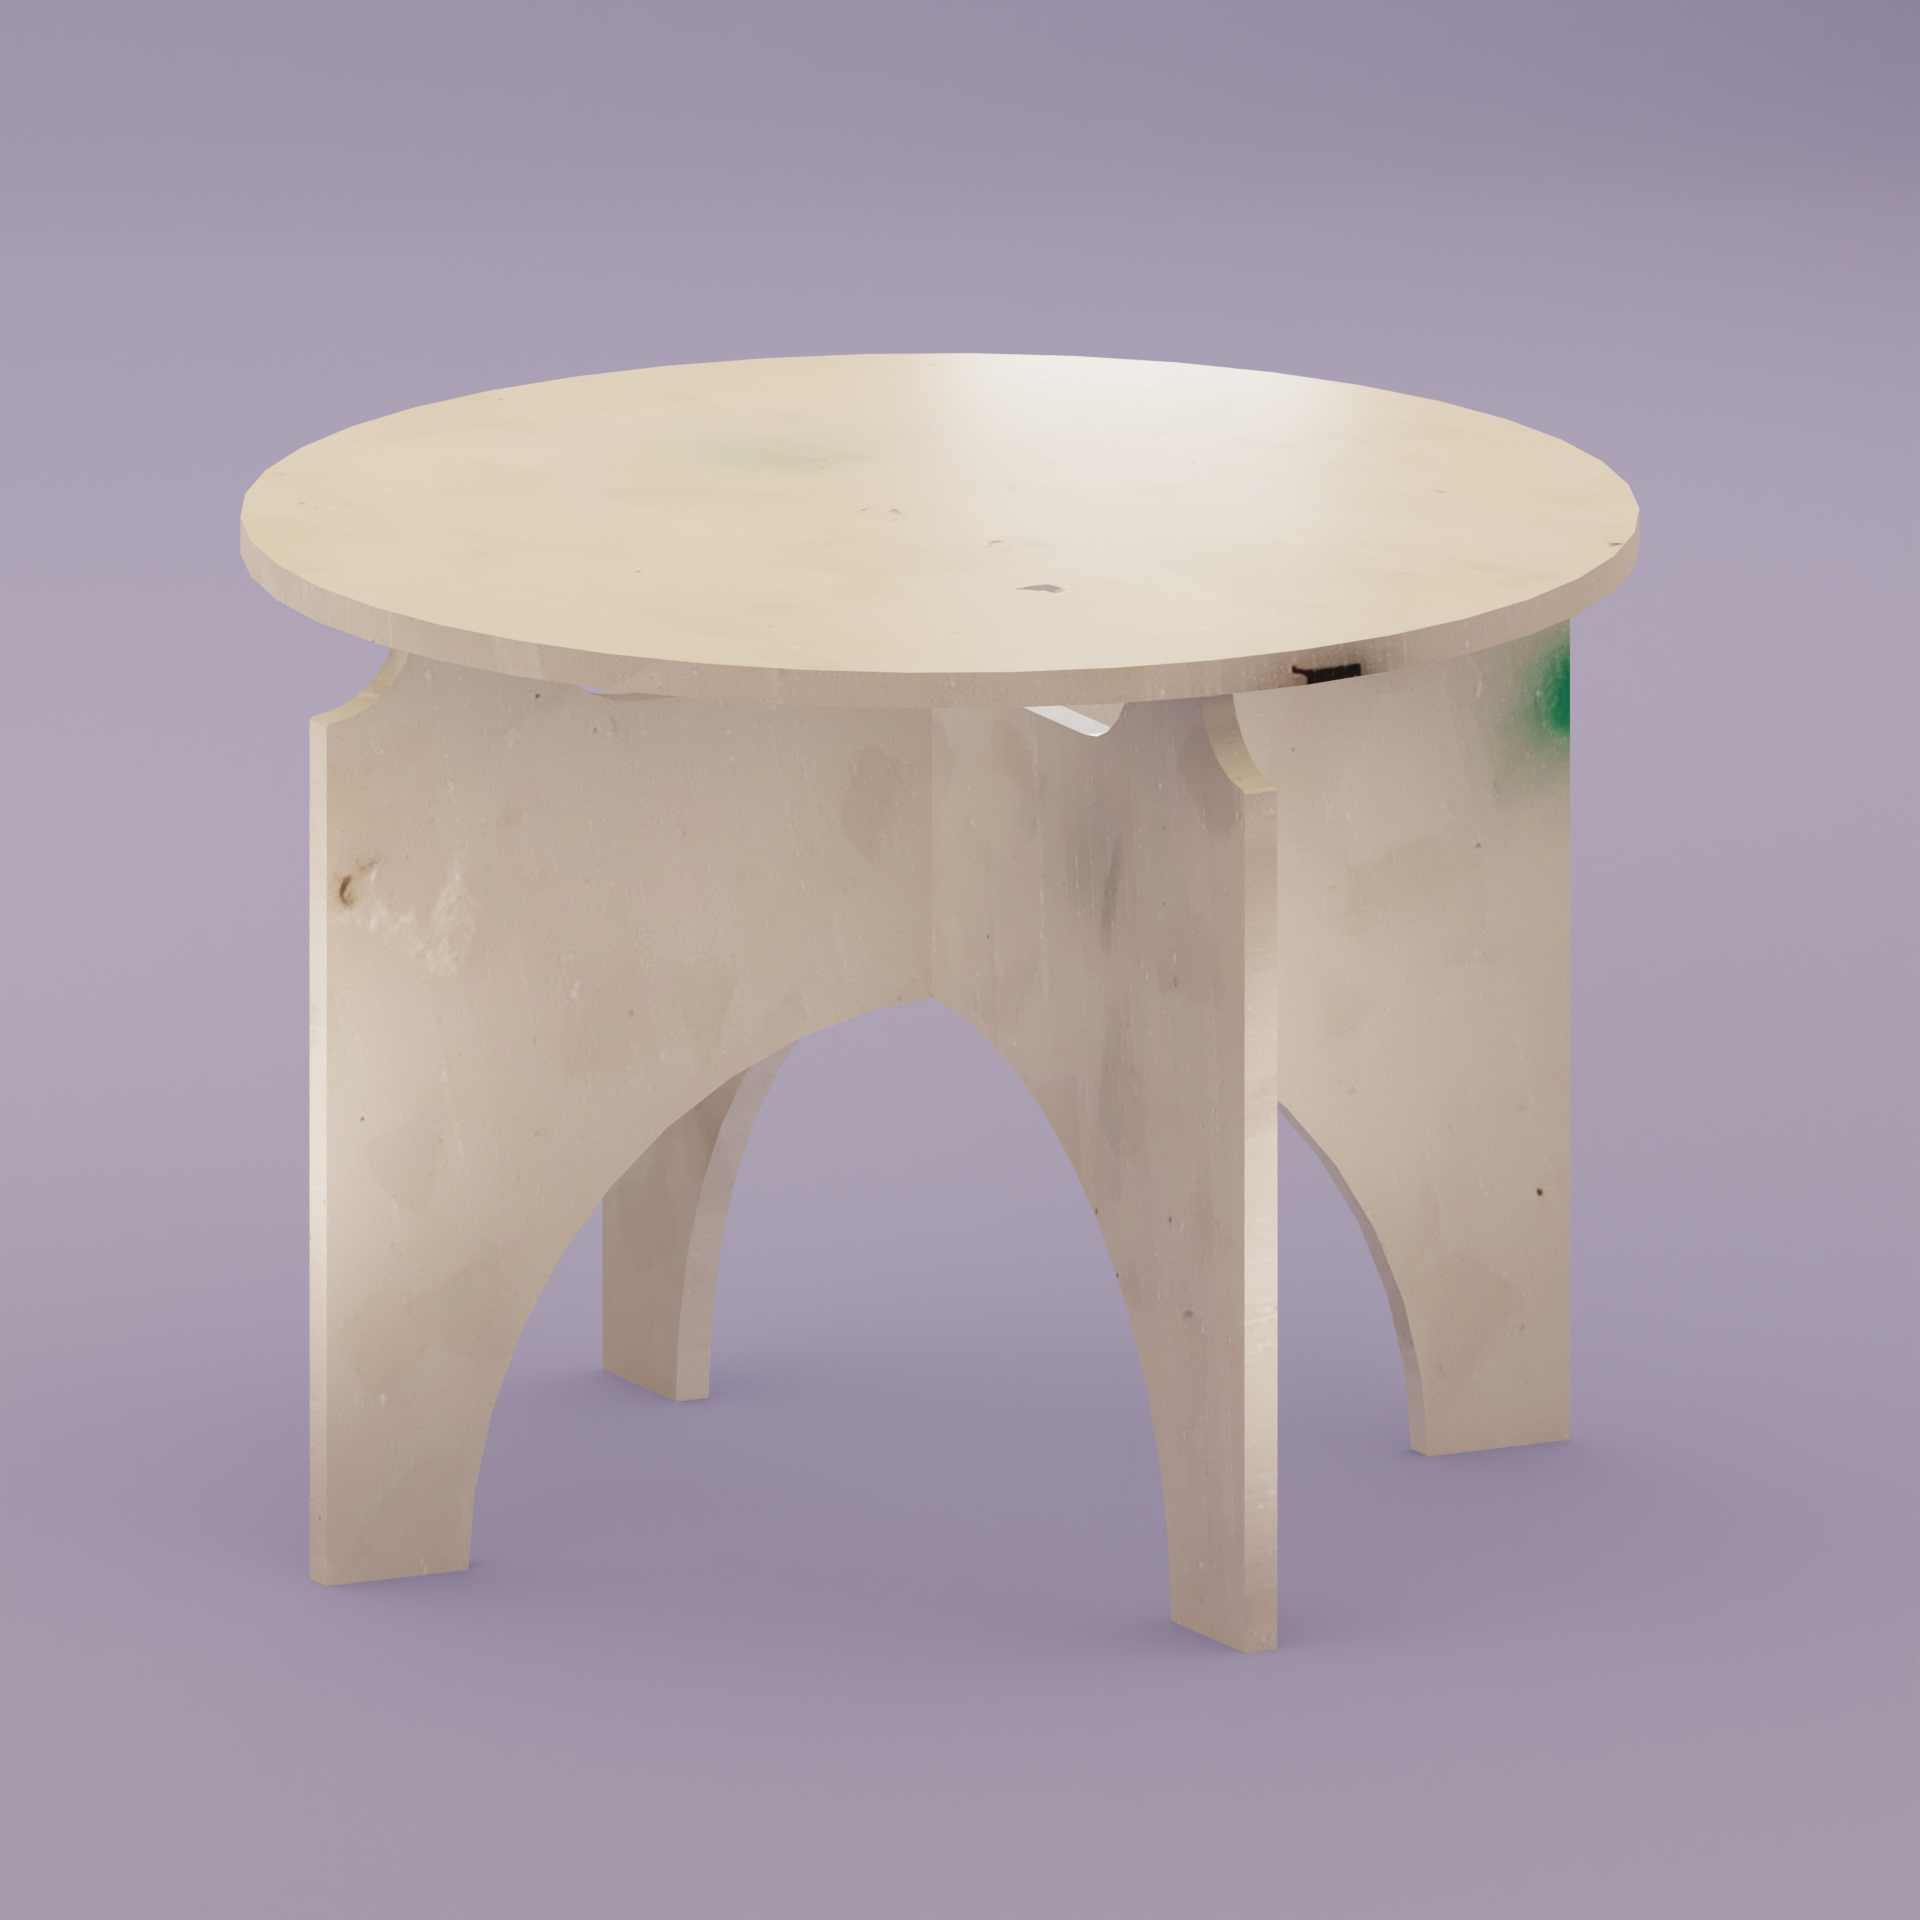 WHITE ROUND TOP TABLE BY THE MINIMONO PROJECT - BRAND FOR ECO FRIENDLY - PLAYFUL - MULTI FUNCTIONAL - SUSTAINABLE - HIGH QUALITY - DESIGN FURNITURE FROM RECYCLED PLASTIC FOR BOTH ADULT AND CHILDREN MADE IN BERLIN GERMANY